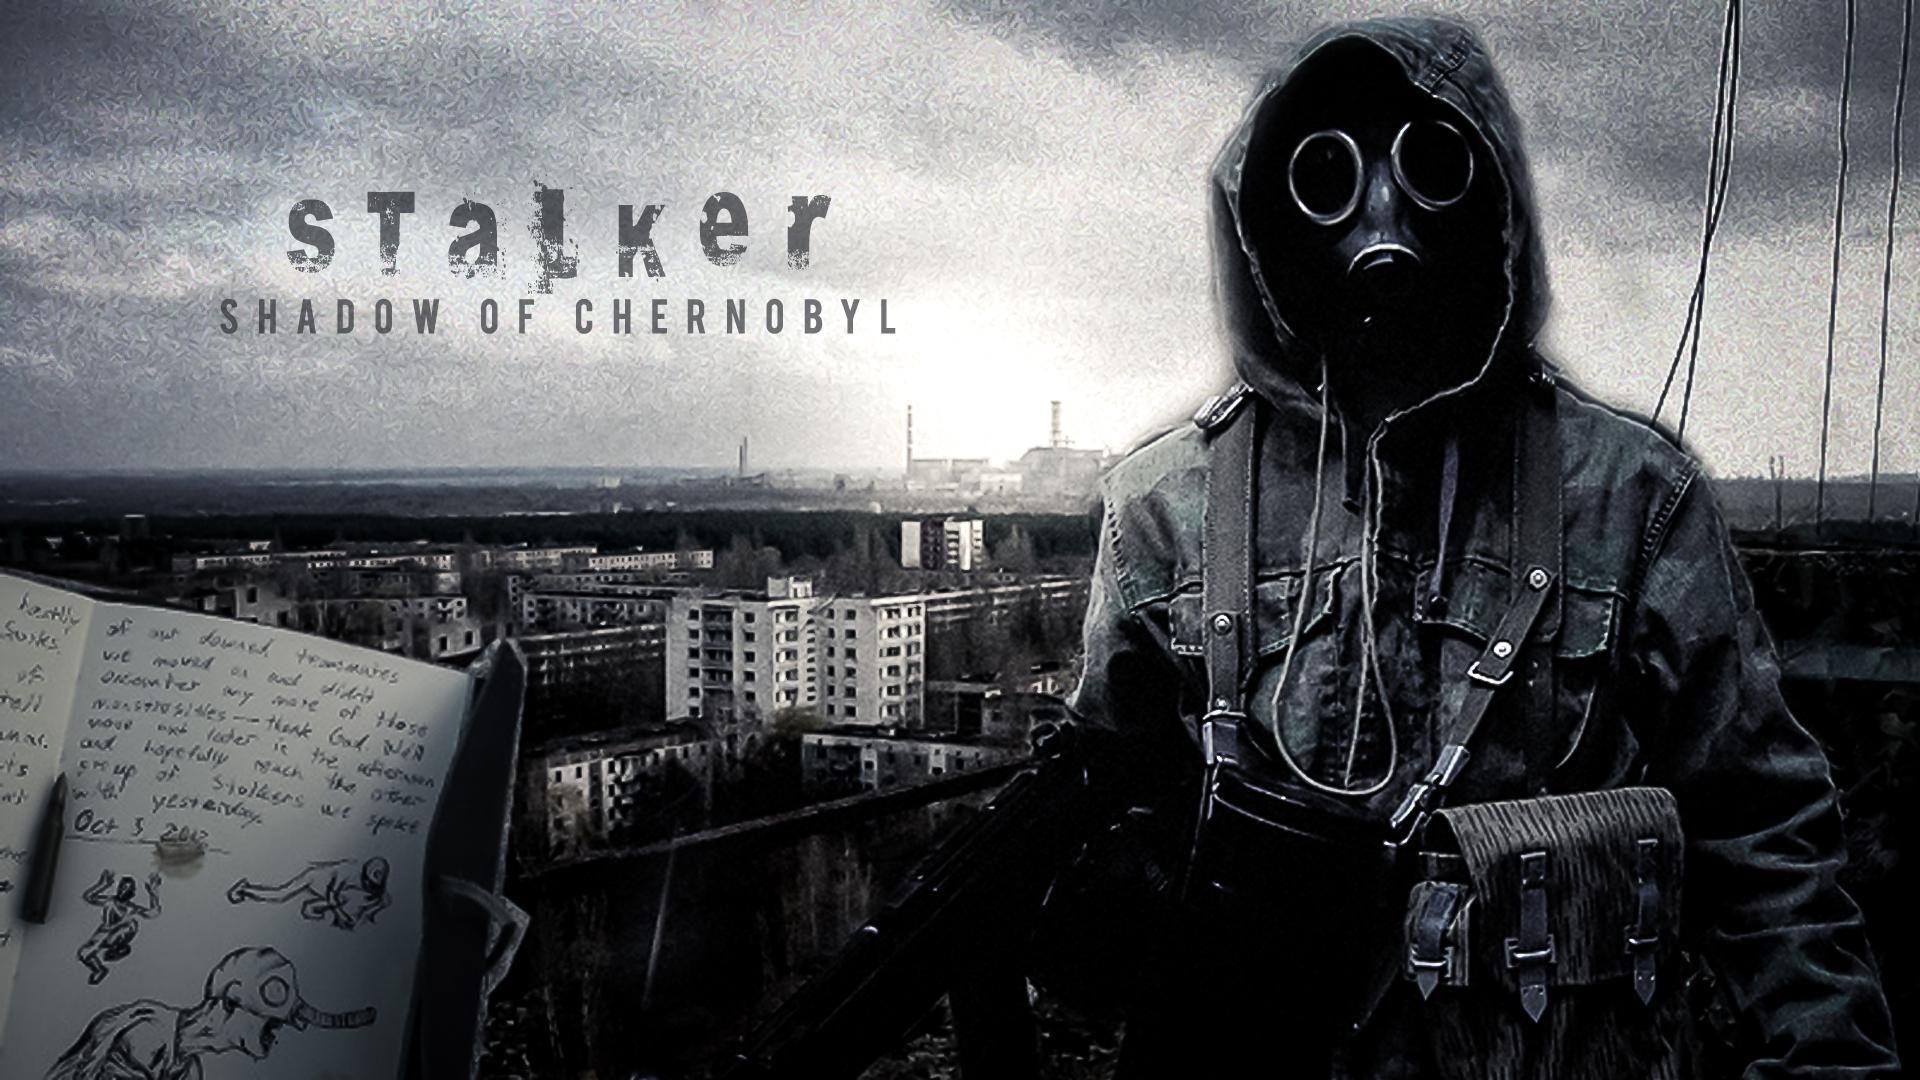 S.T.A.L.K.E.R. Shadow of Chernobyl Free Download